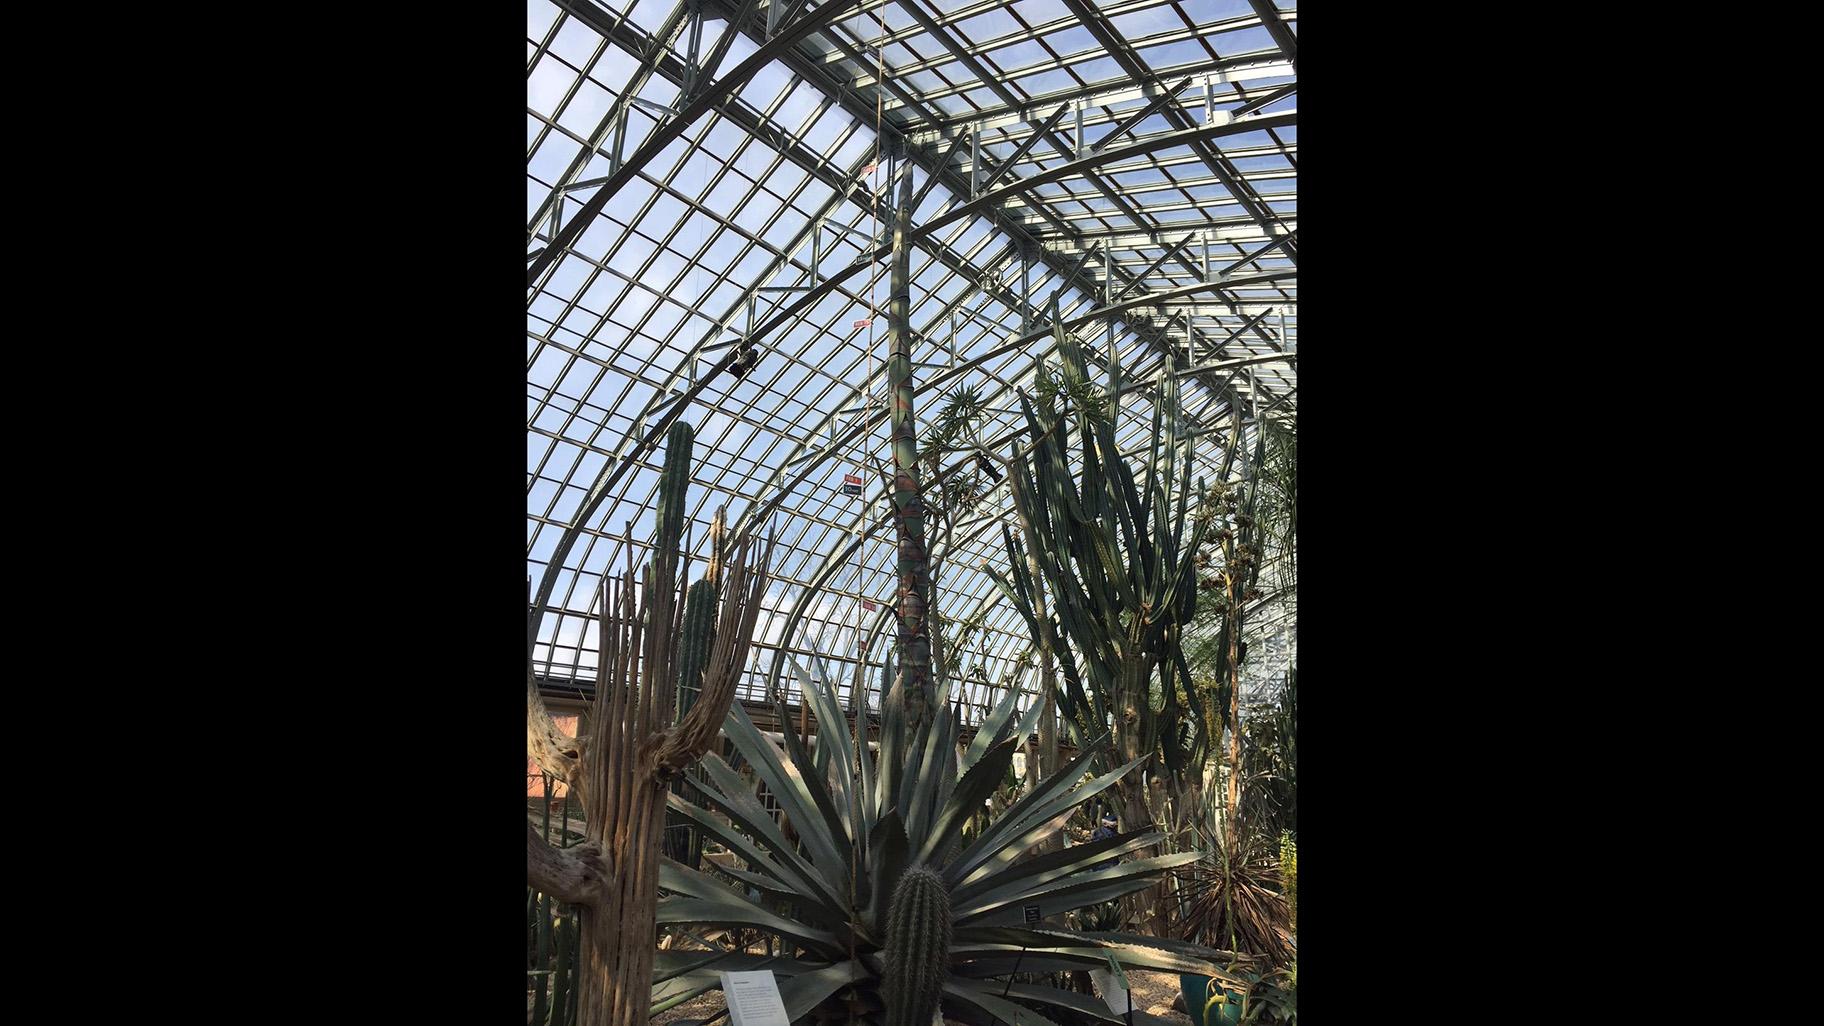 The century plant measured 17 feet, 6 inches tall on March 4, 2019. 